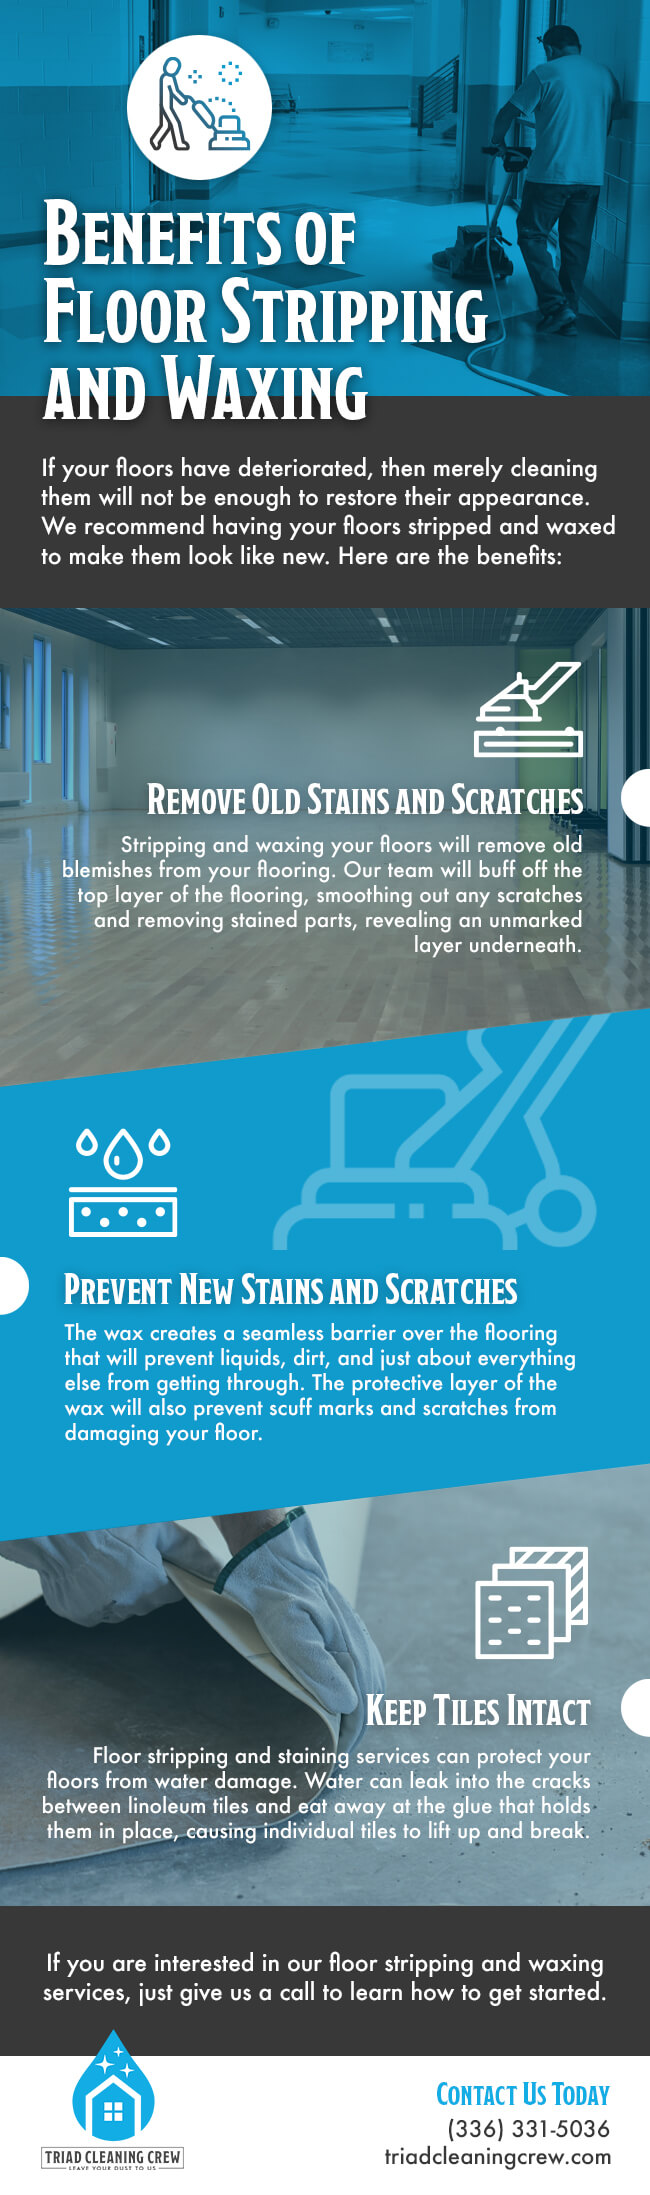  Benefits of Floor Stripping and Waxing